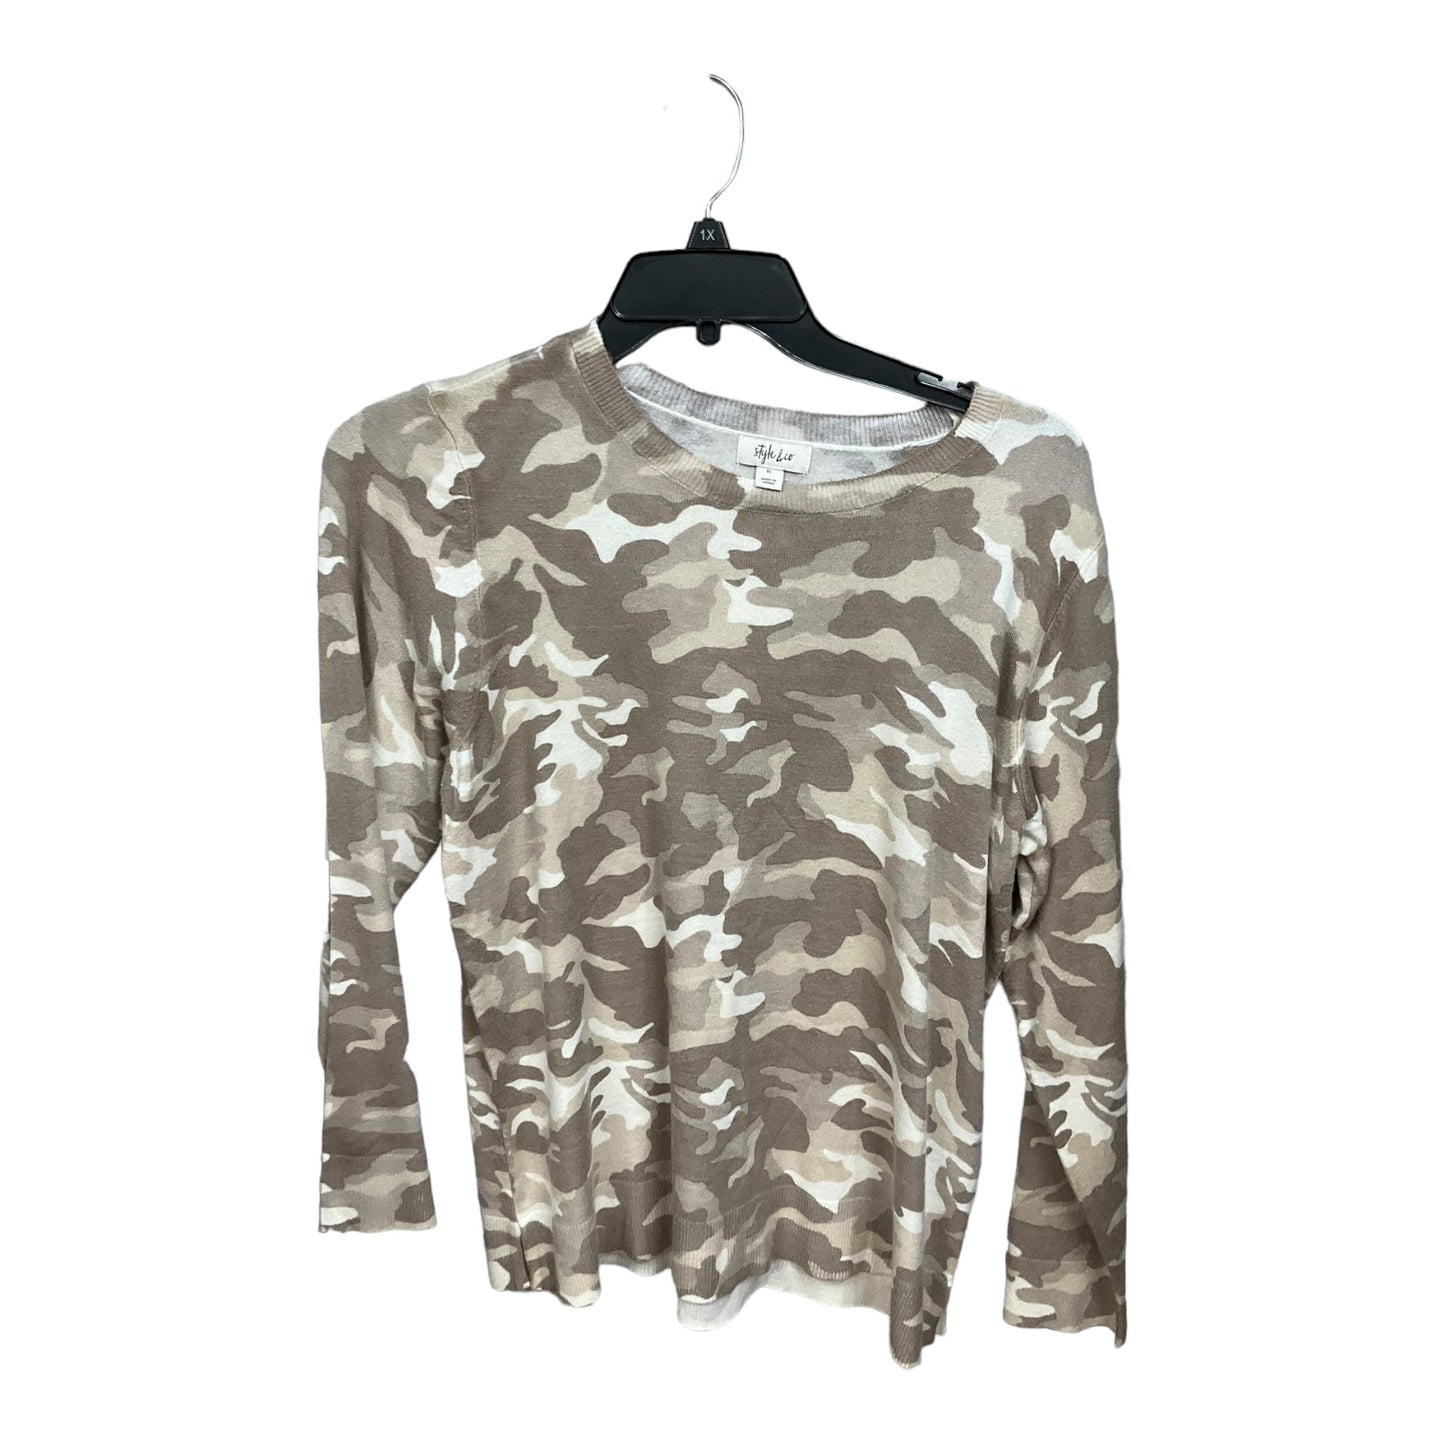 Camouflage Print Top Long Sleeve Basic Style And Company, Size Xl